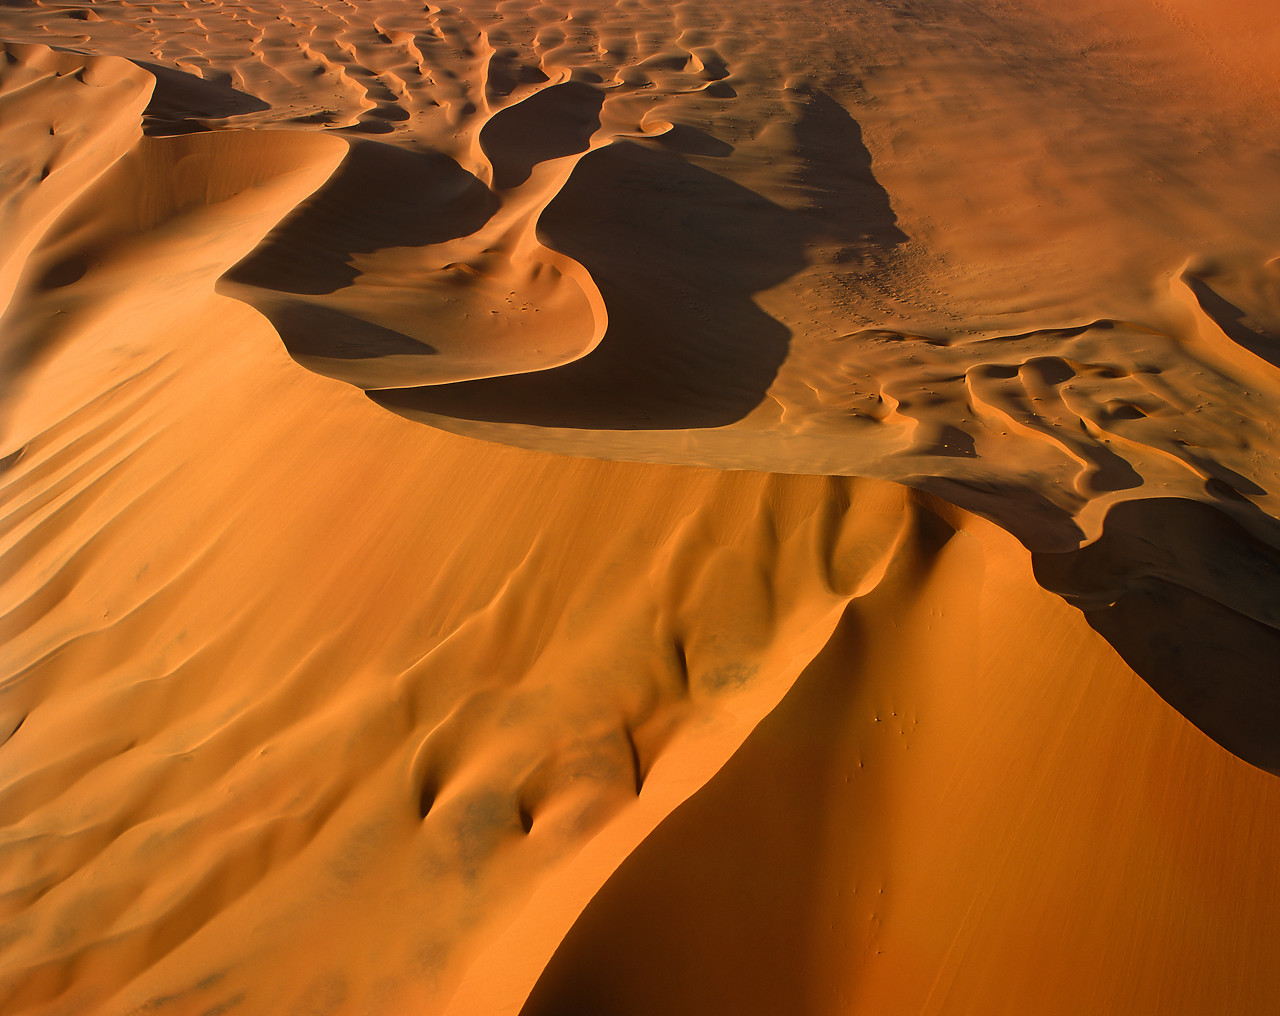 #010041-1 - Aerial View of Sand Dunes, Sossusvlei, Namibia, Africa